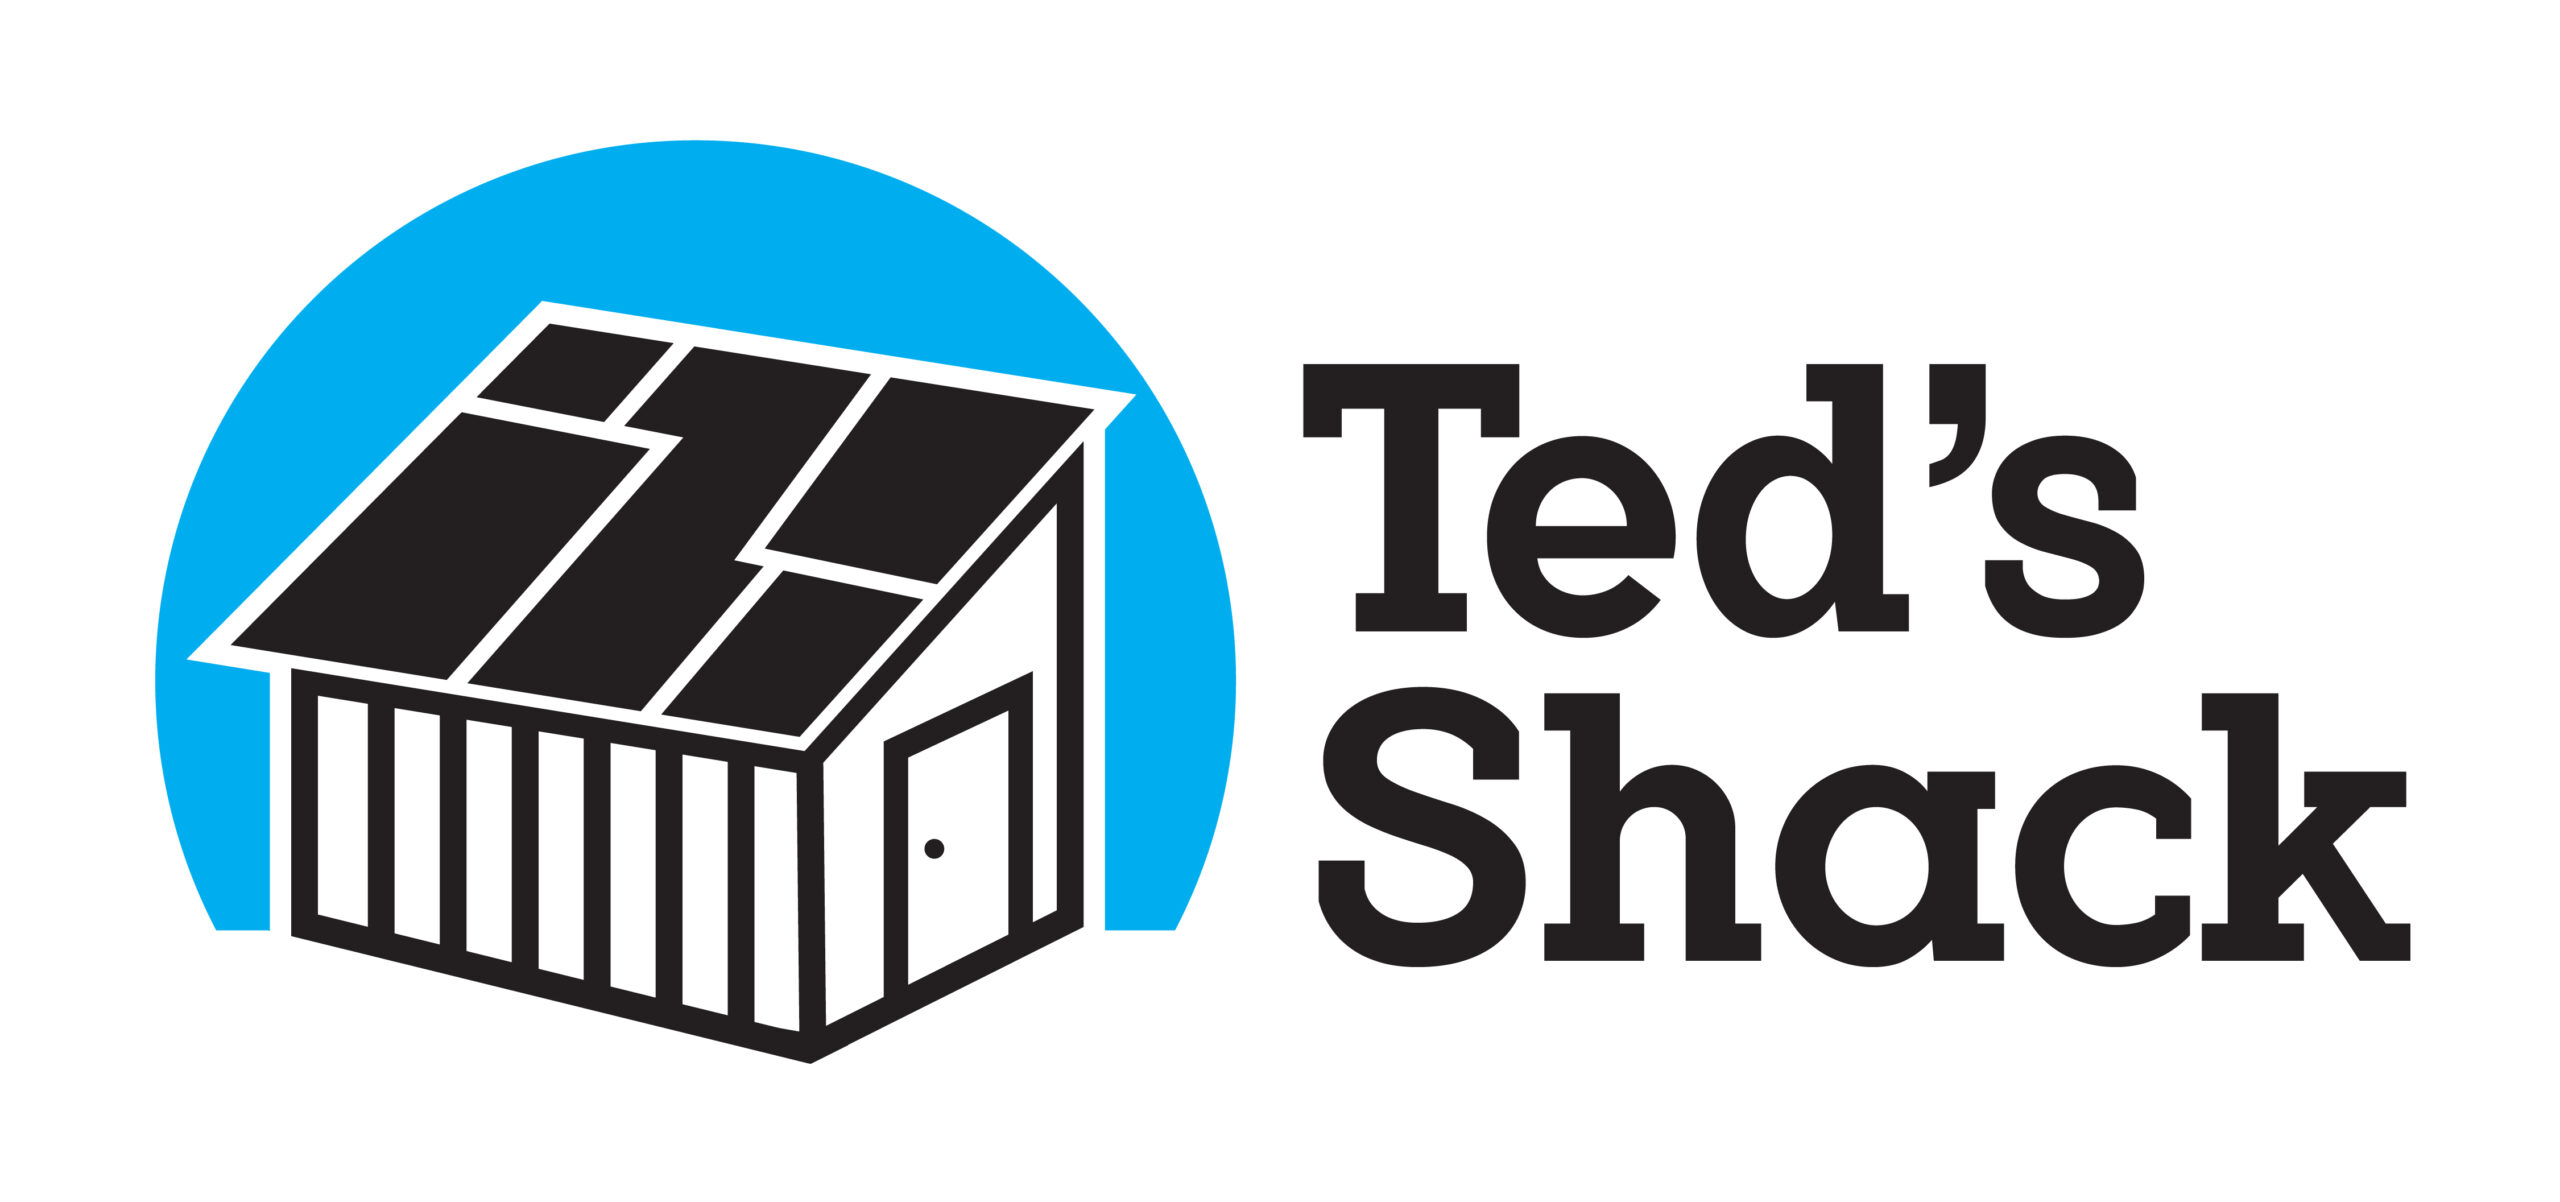 Ted's Shack